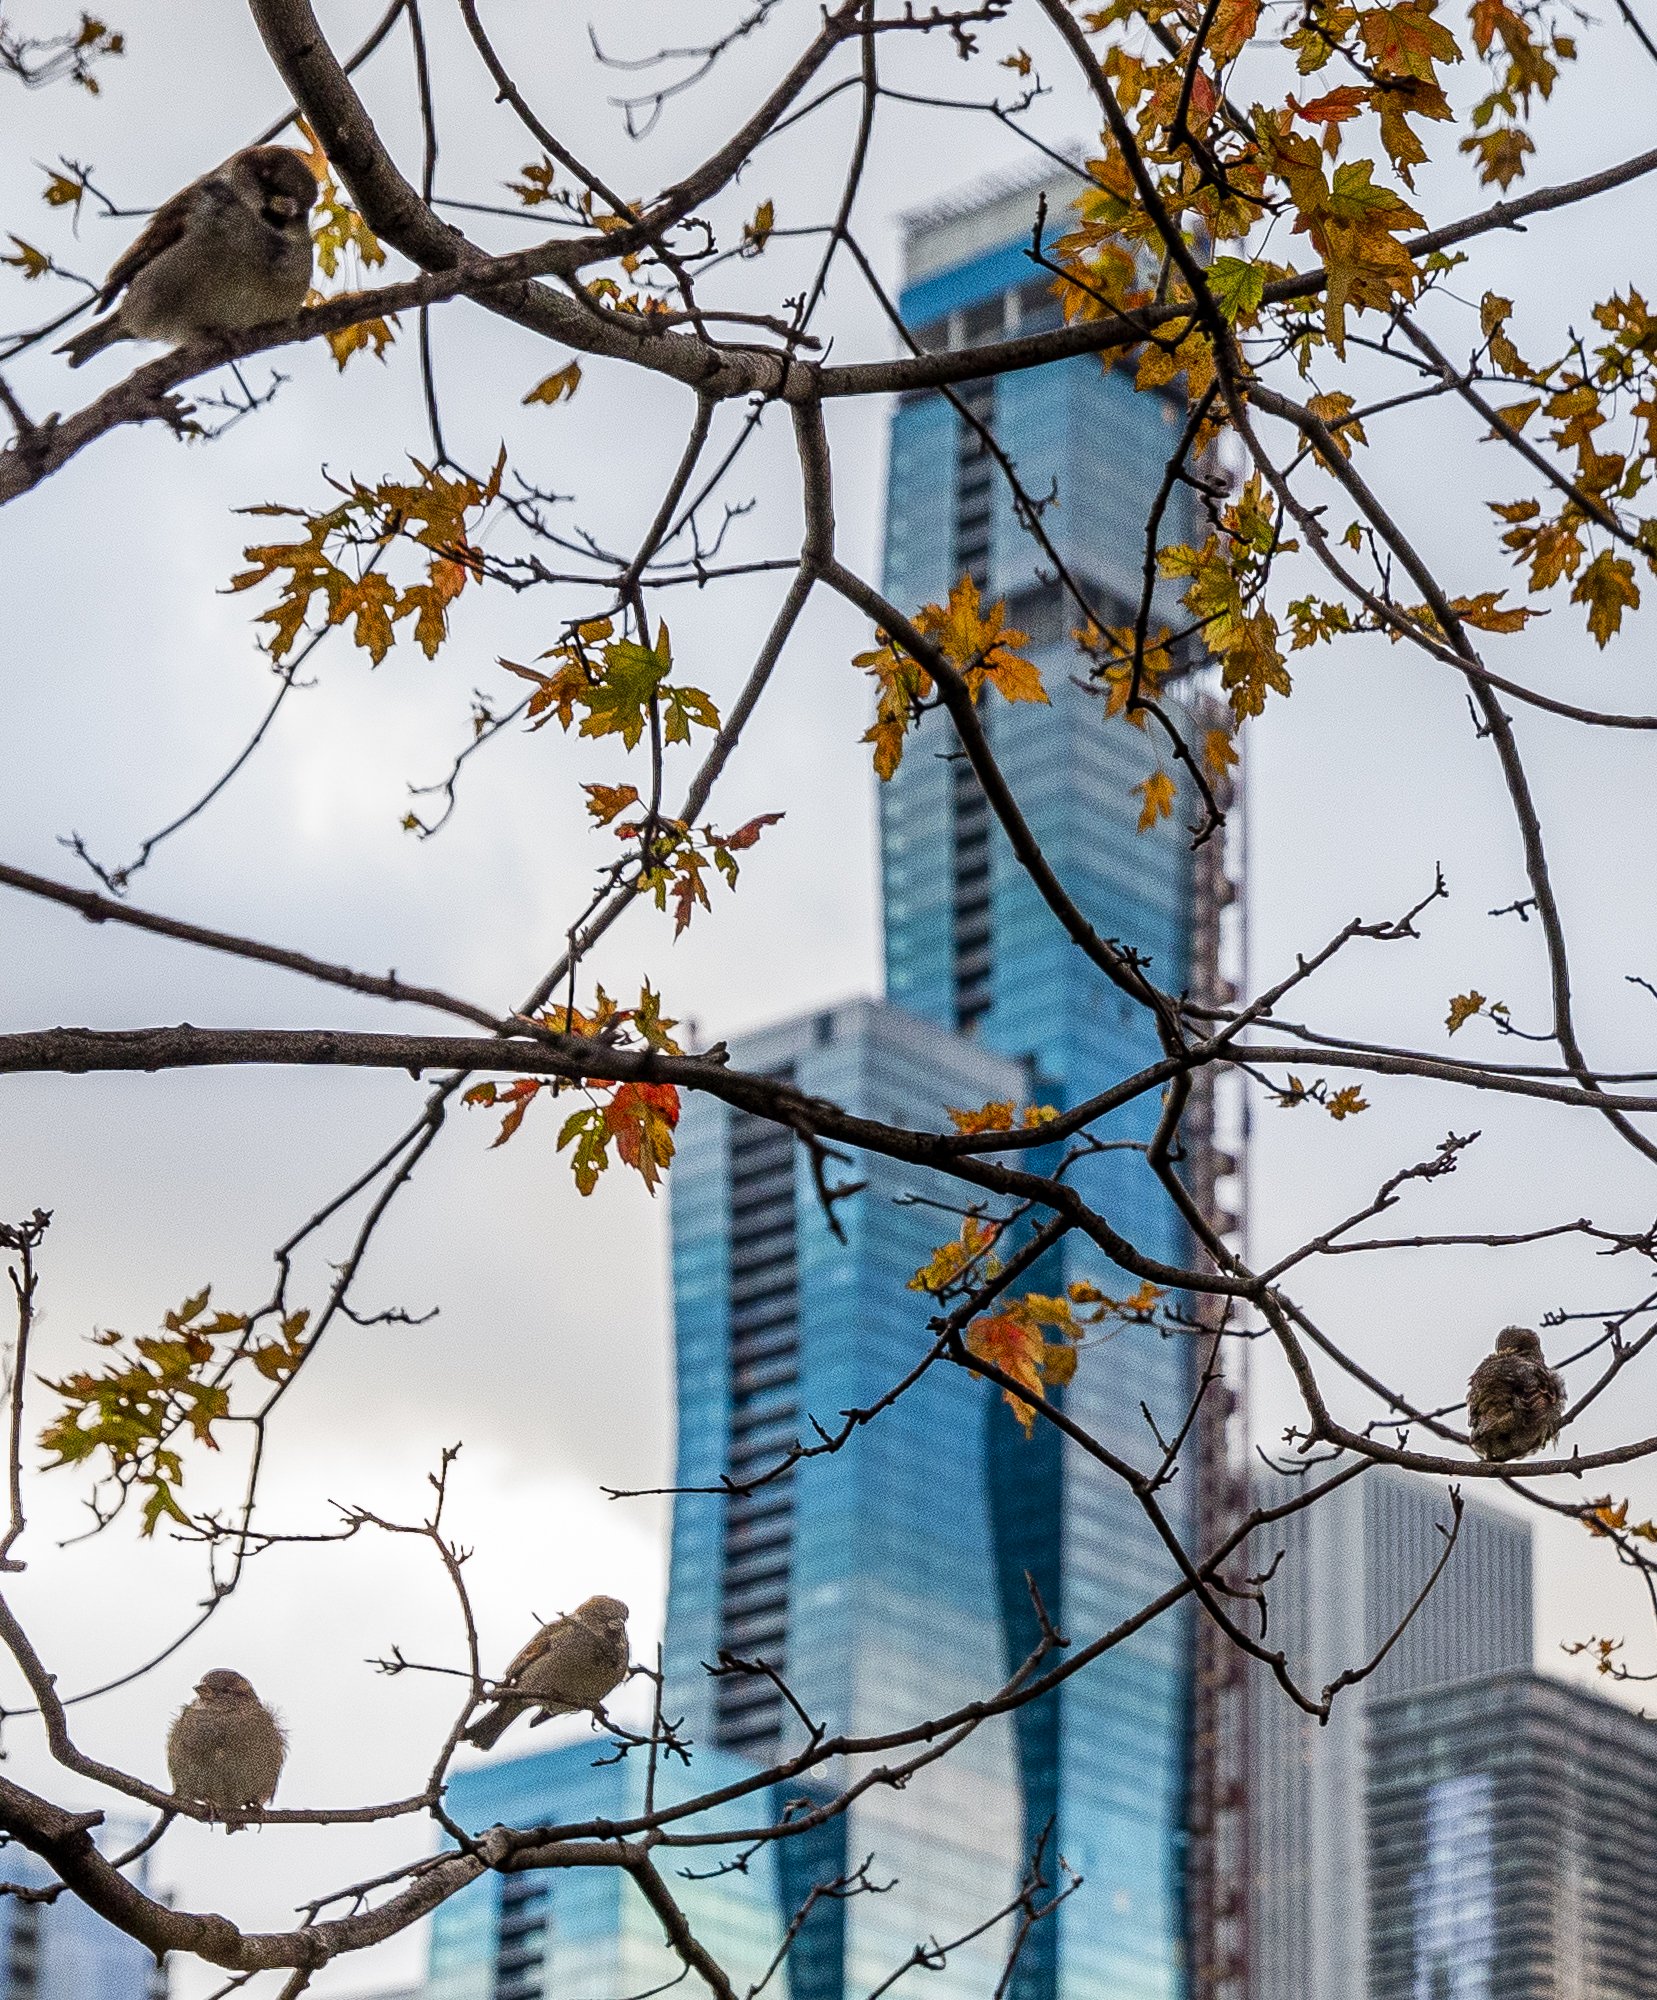  Birds atop a tree in Chicago, Illinois.  